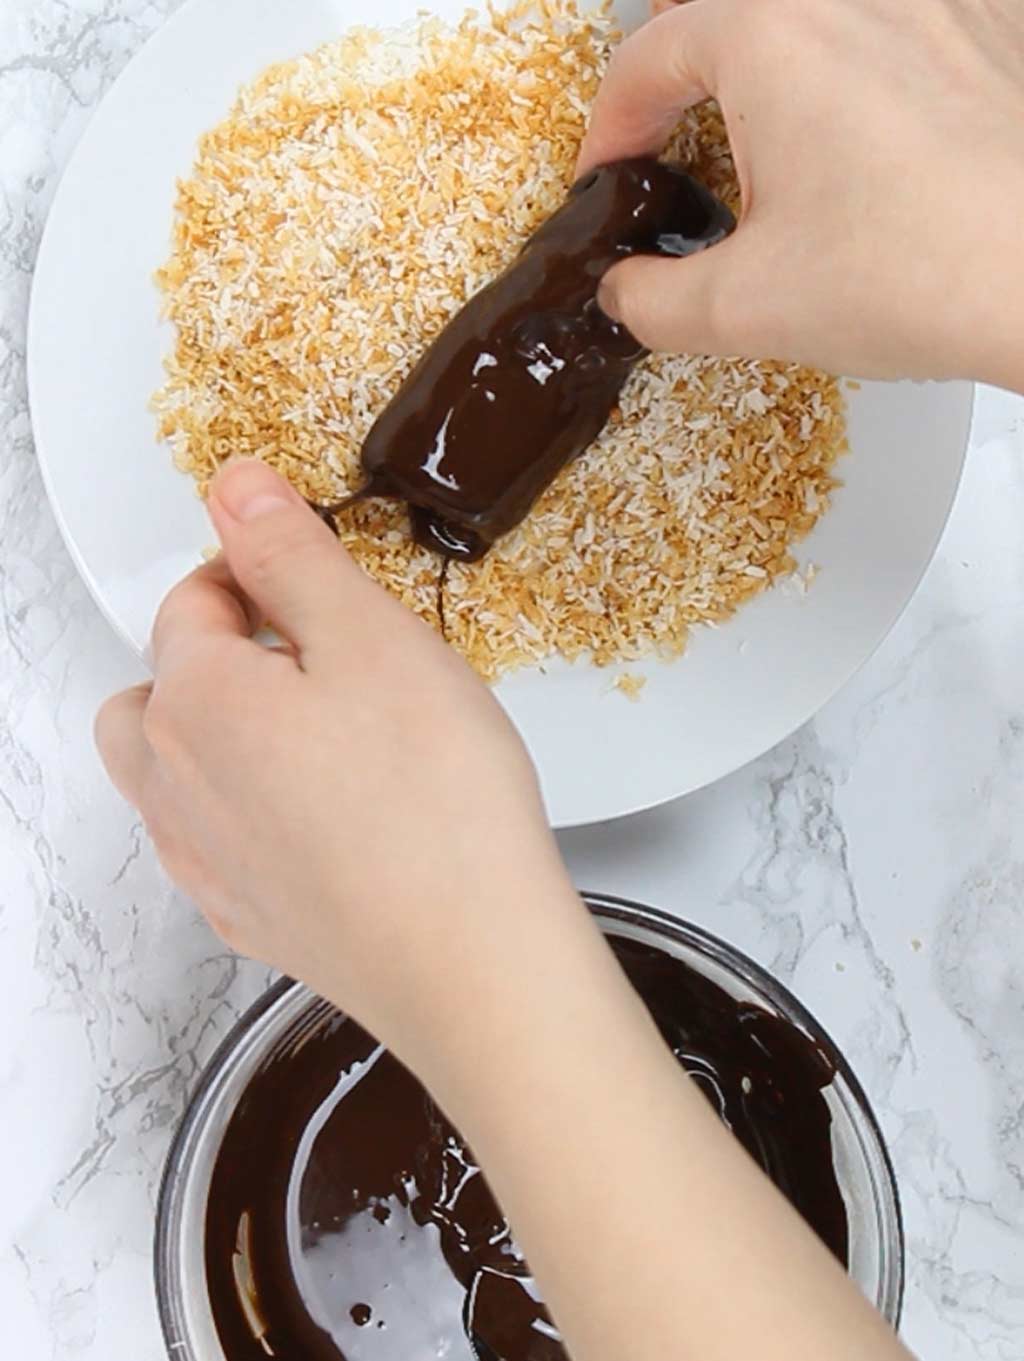 rolling the chocolate-dipped bars in the desiccated coconut mix